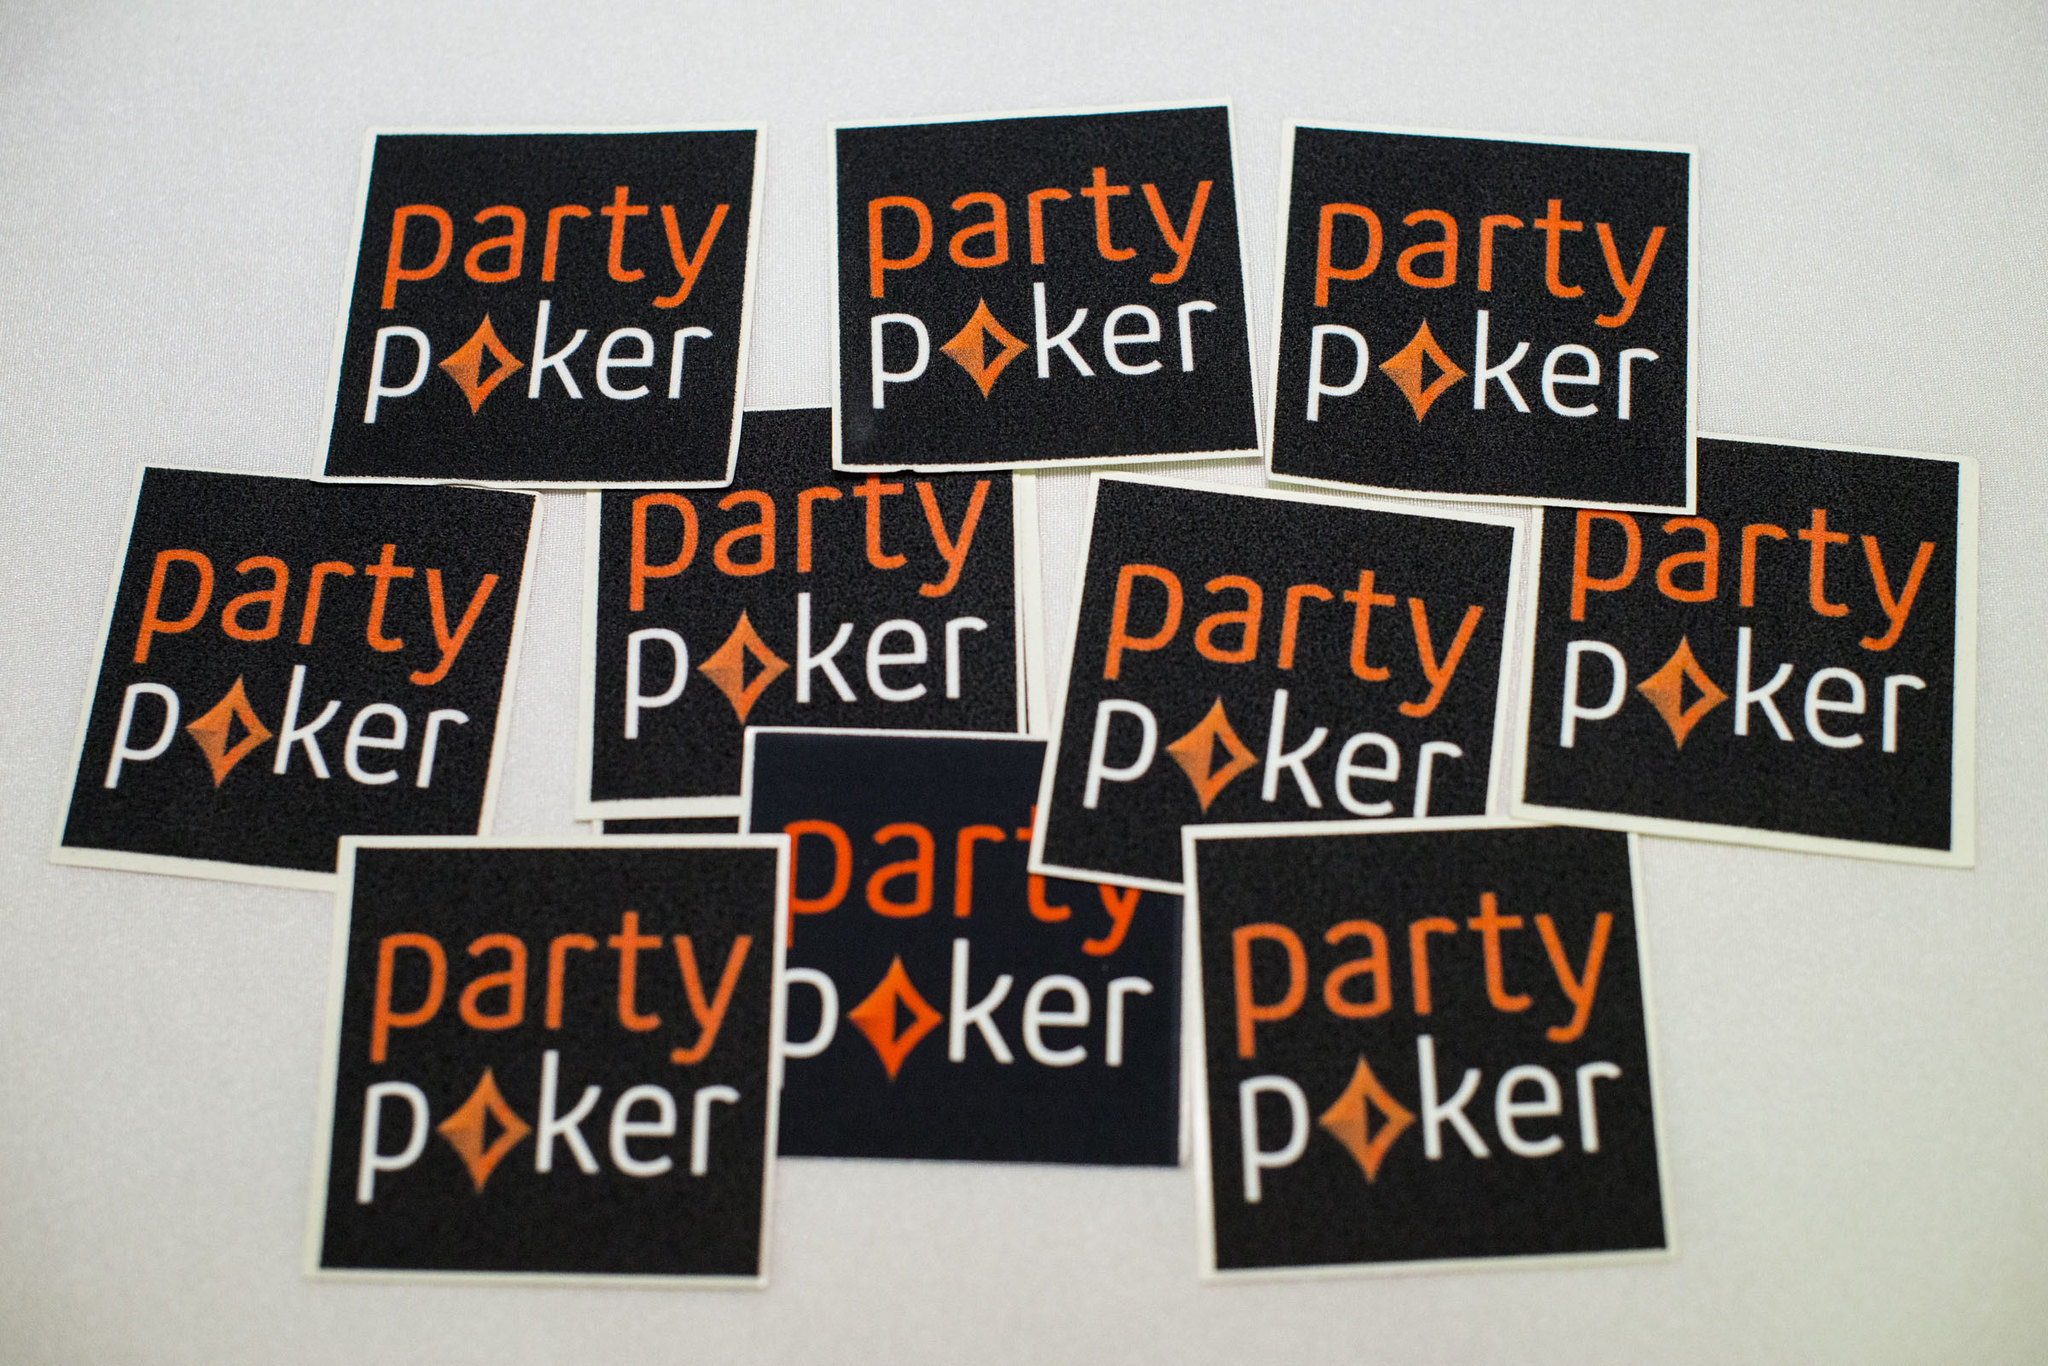 Partypoker Banning Players on Its Online Blacklist From Live Tournaments, As Well